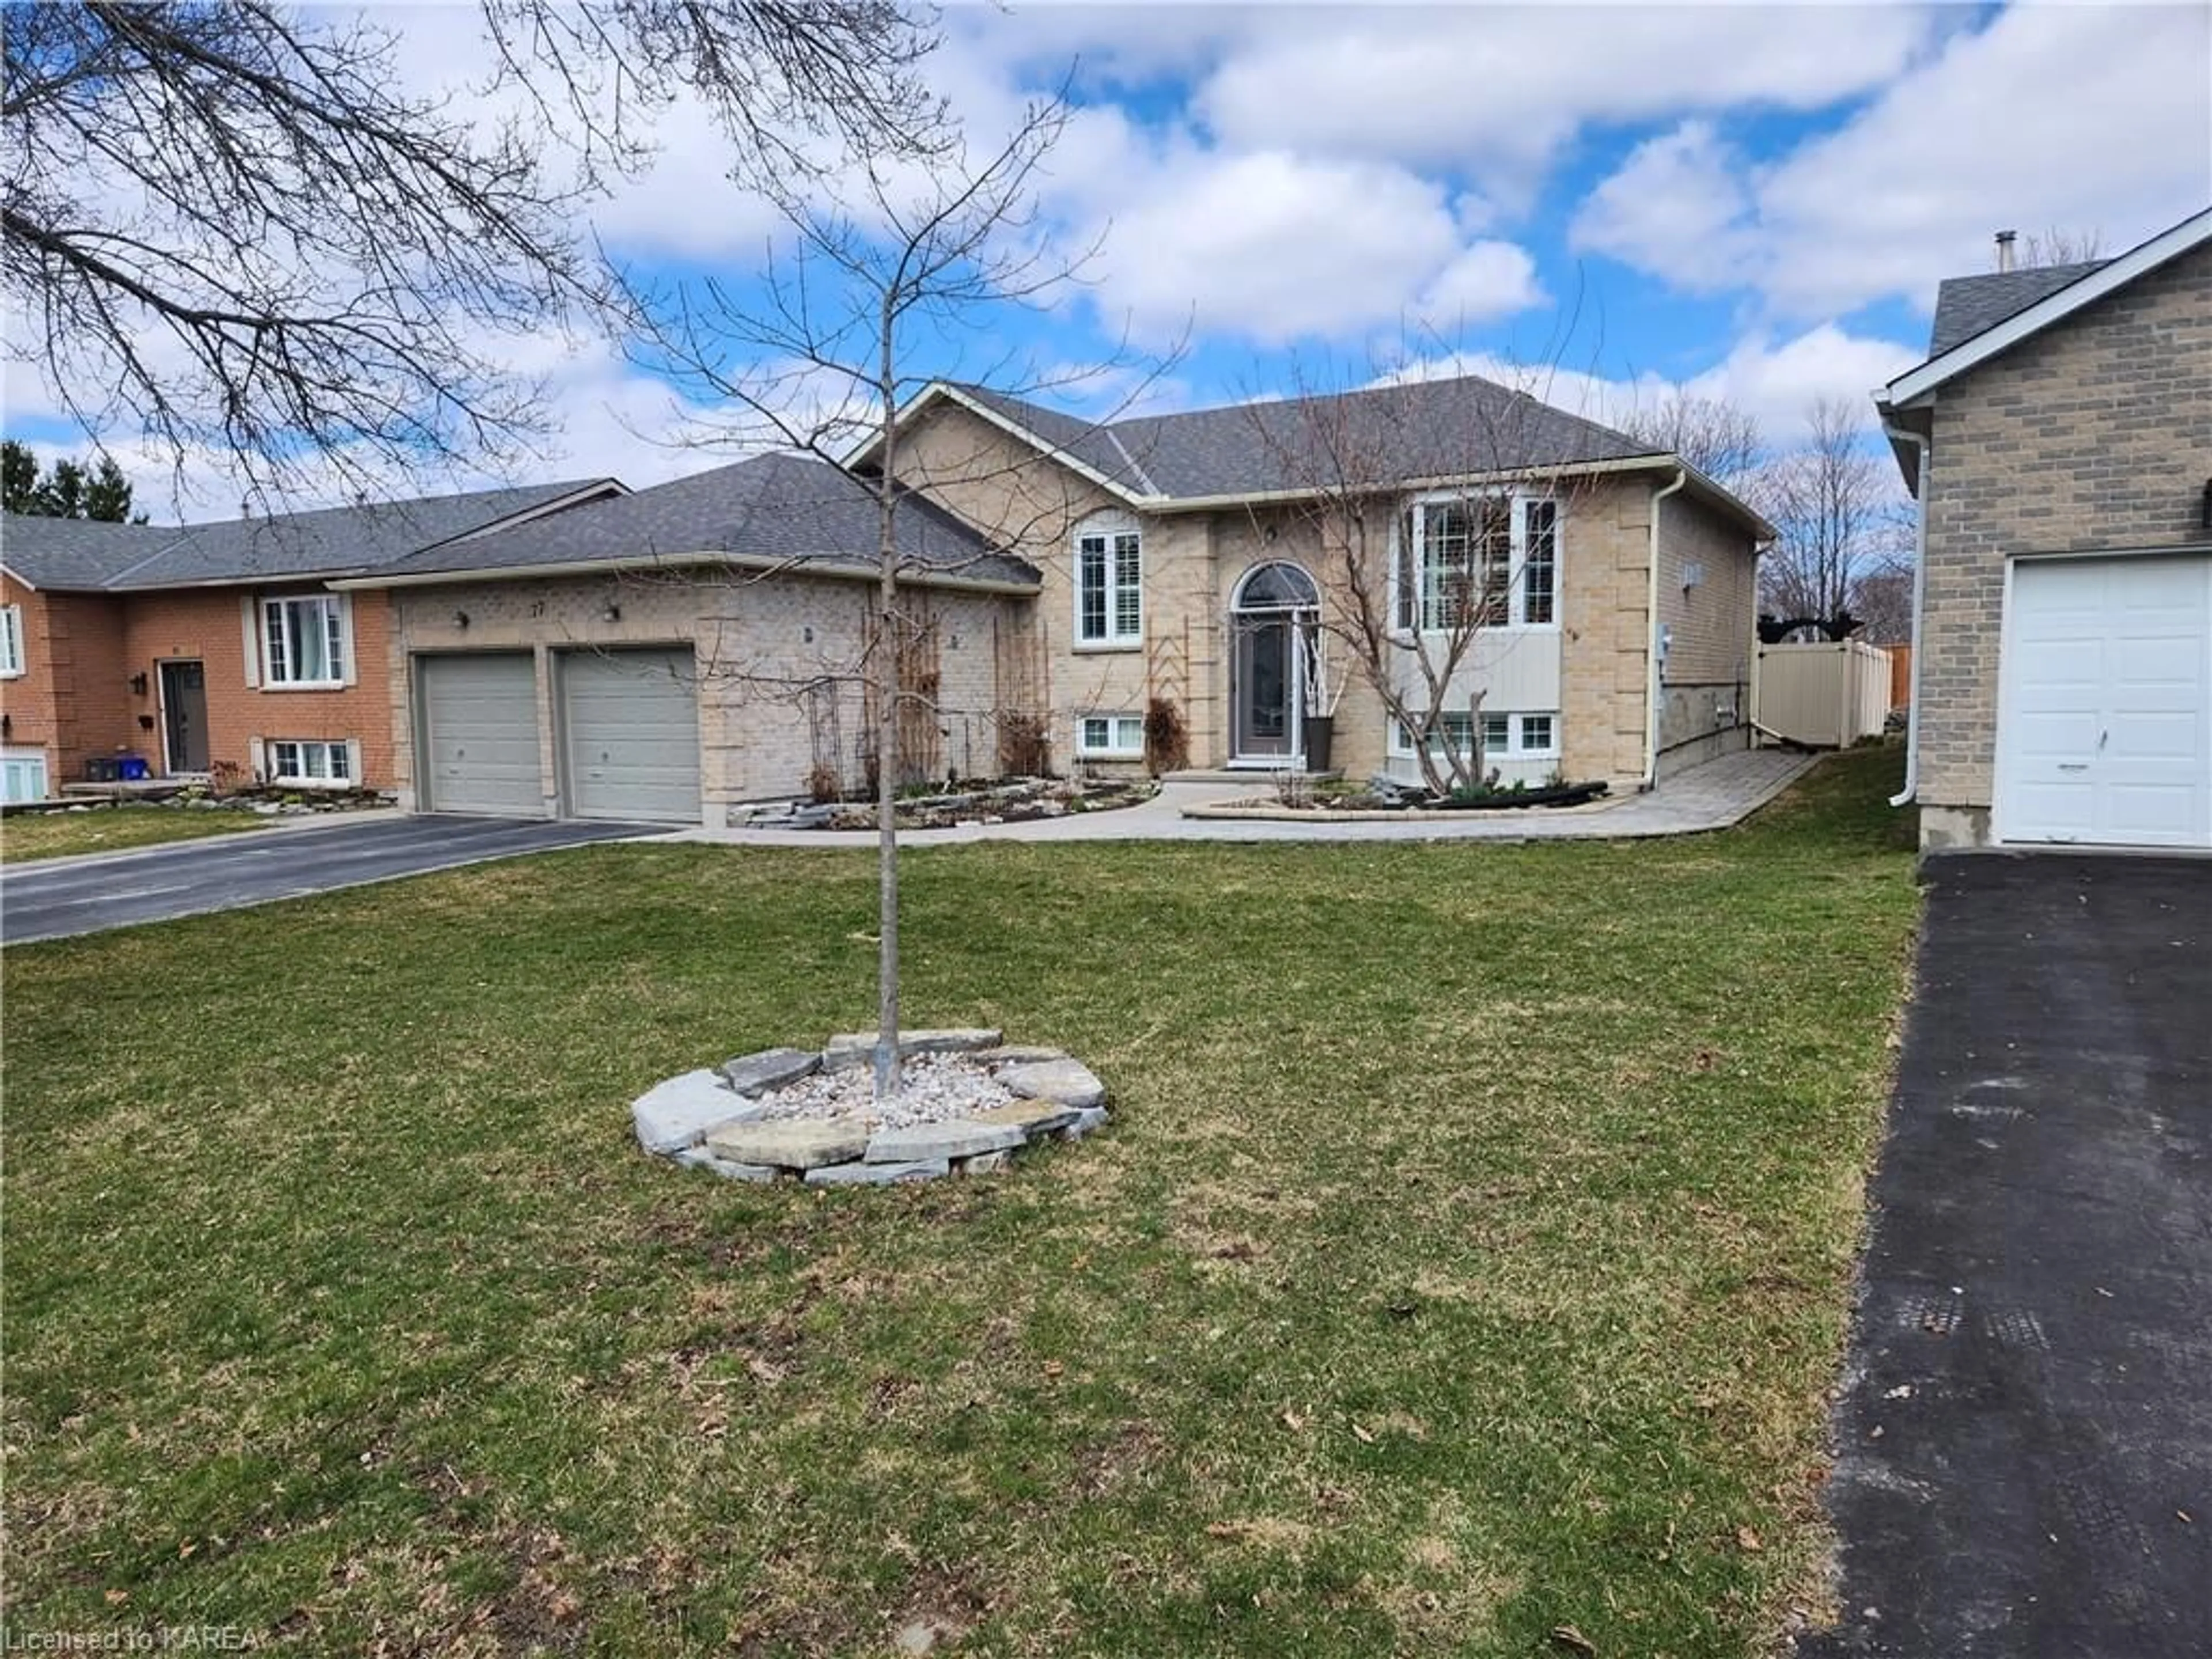 Home with unknown exterior material for 77 Barker Dr, Kingston Ontario K7K 6X8